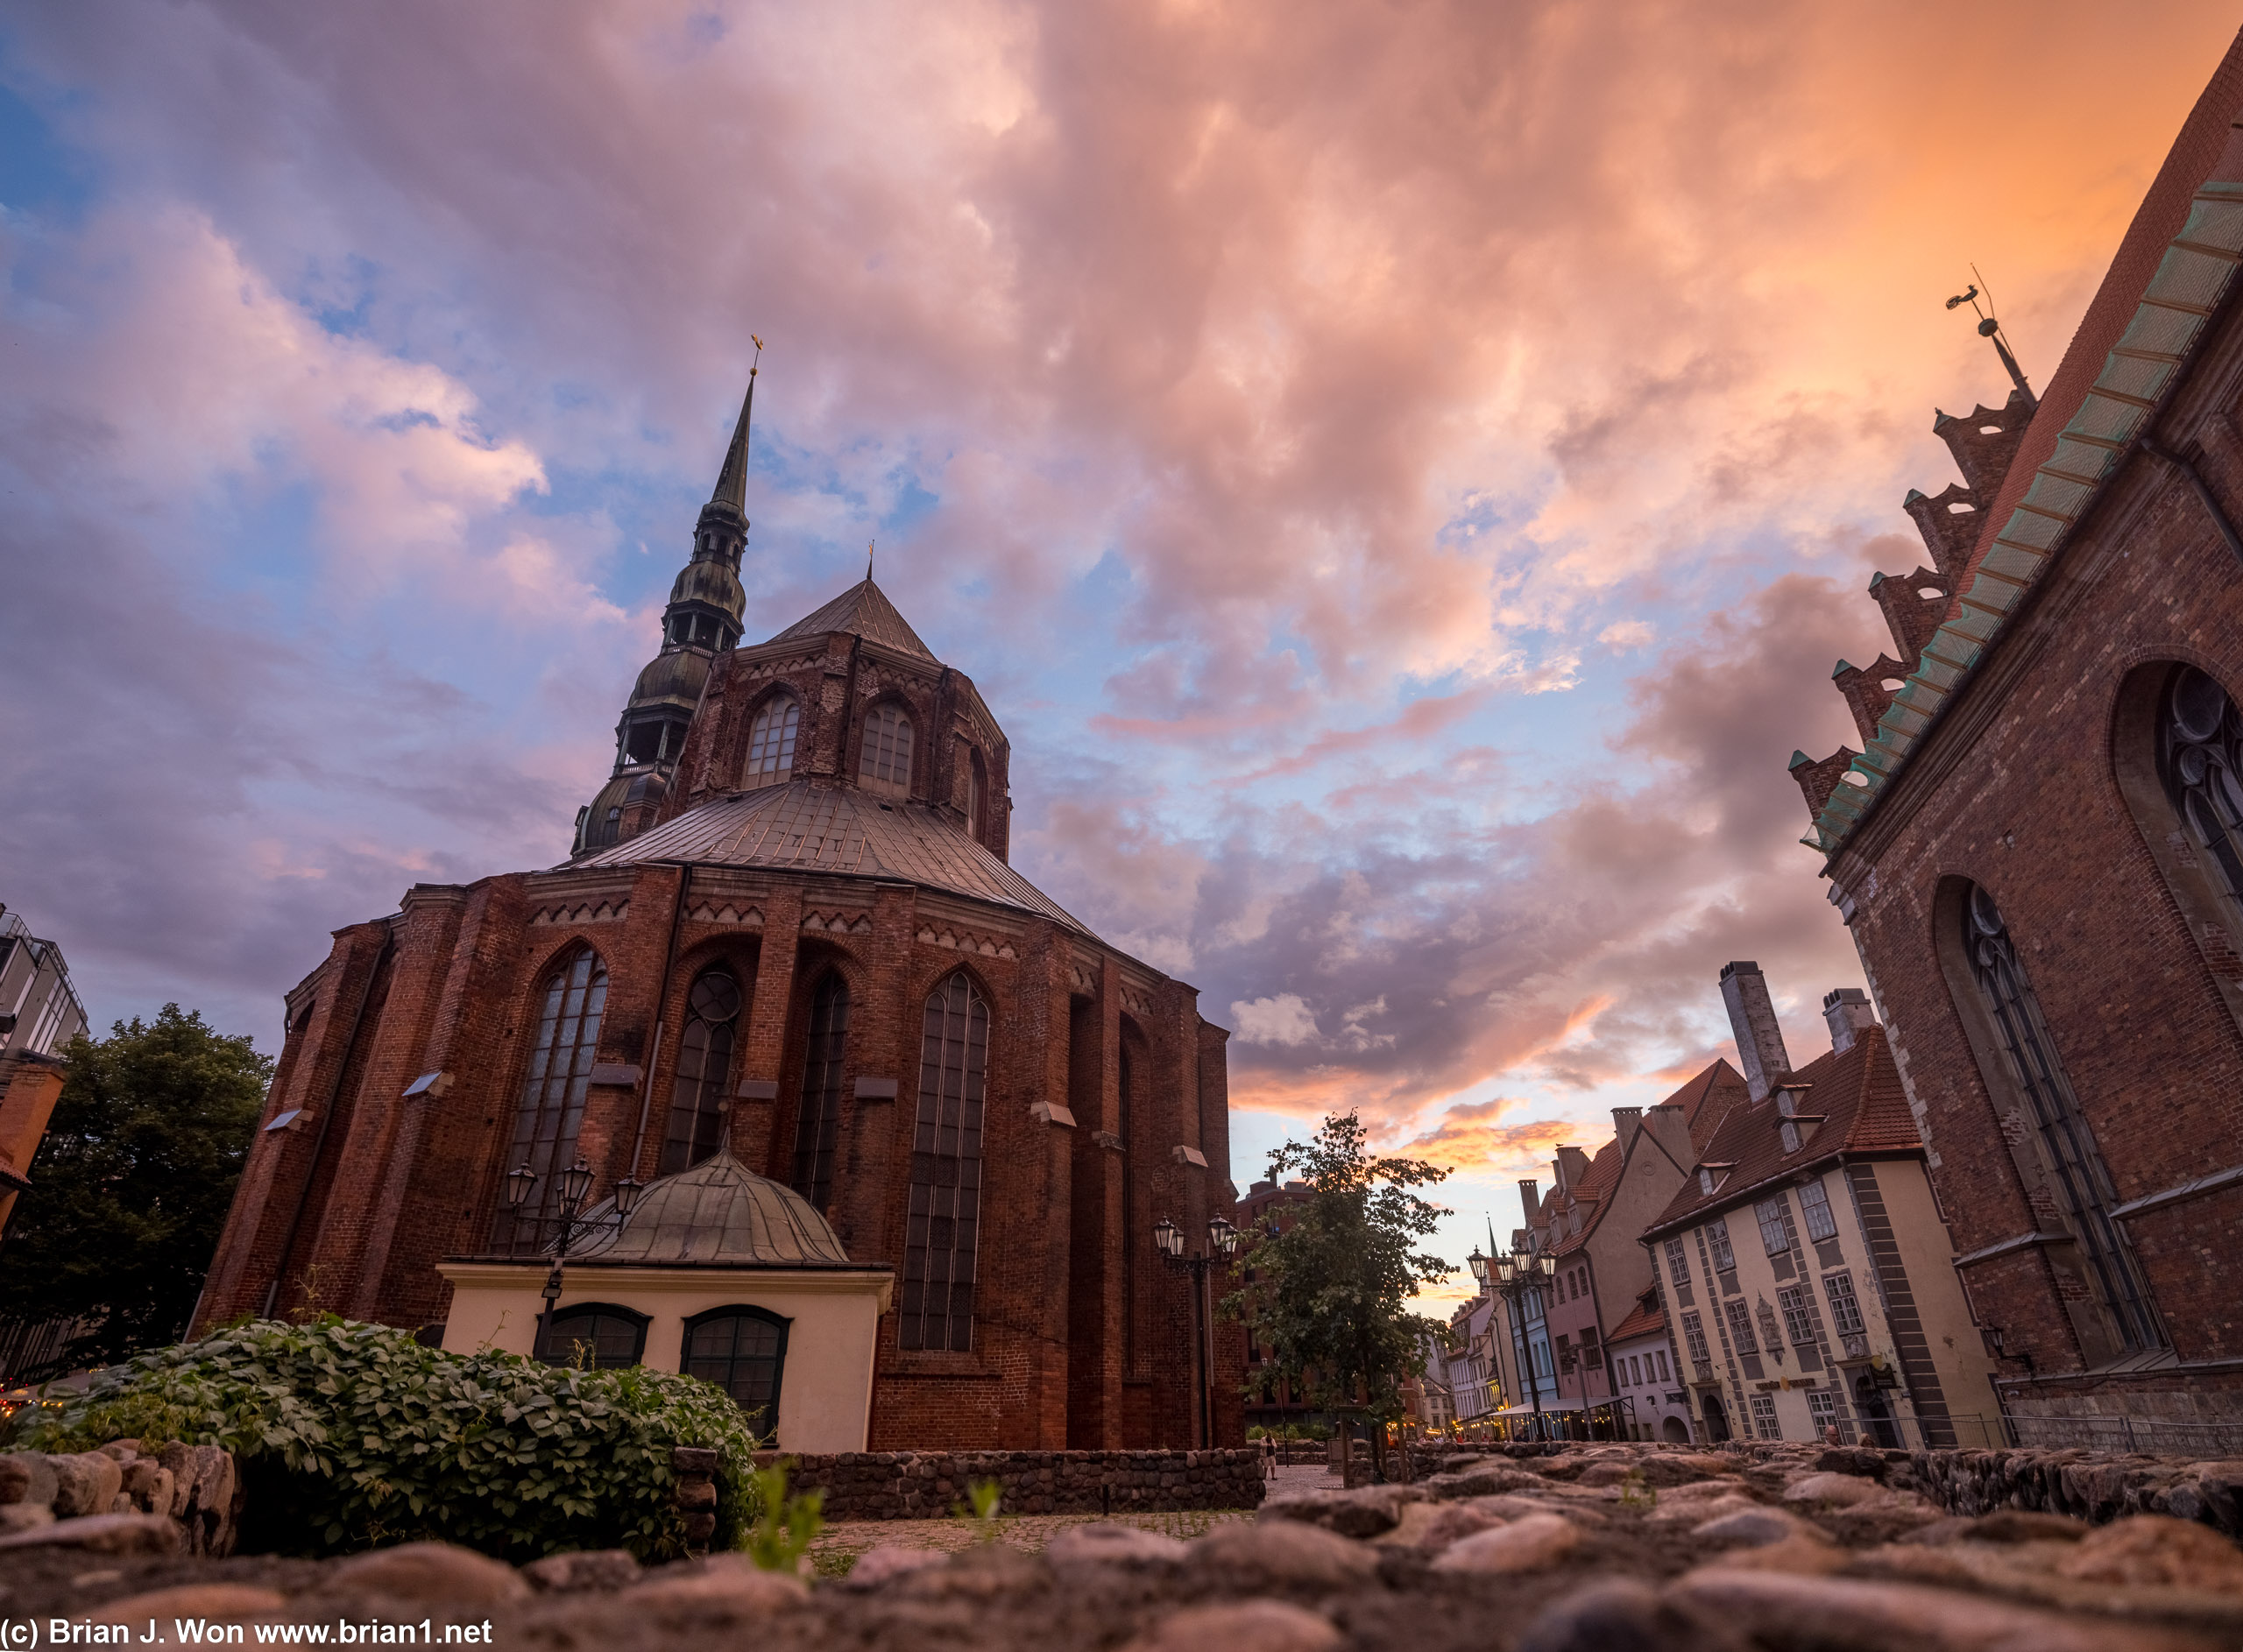 Late night summer sunset over St. Peter's Church.